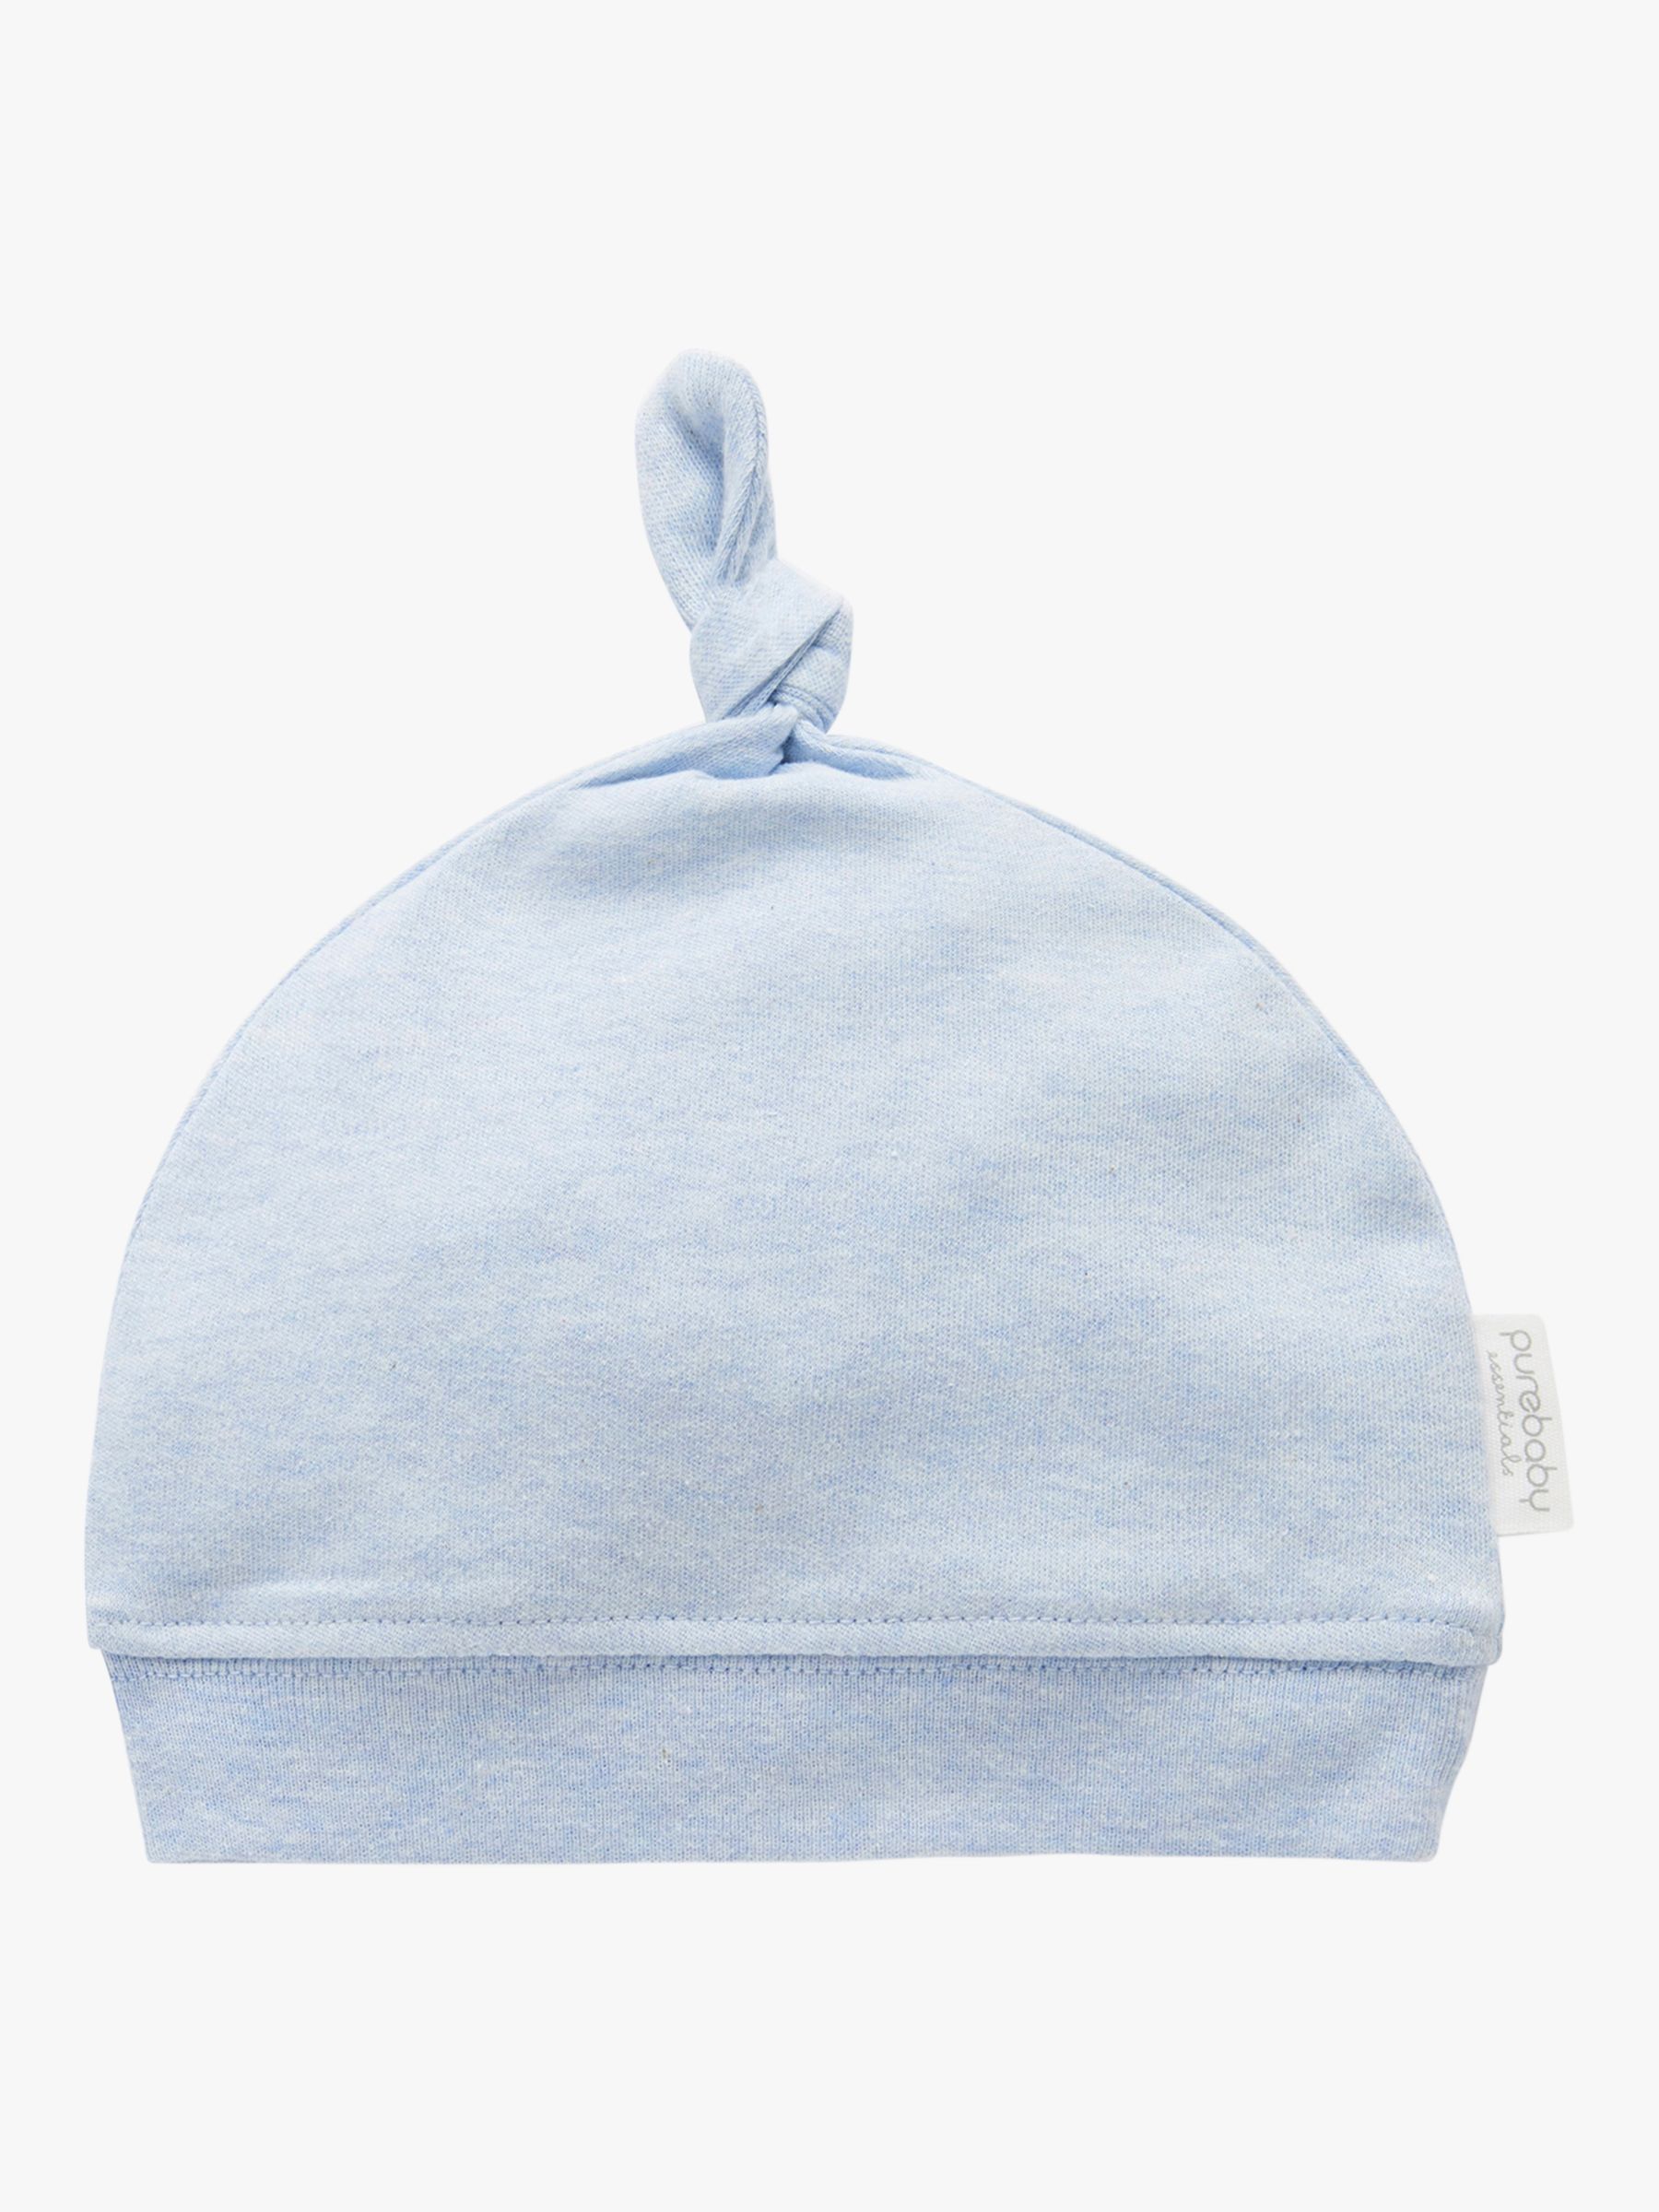 Purebaby Knot Hat, Light Blue, Early Baby